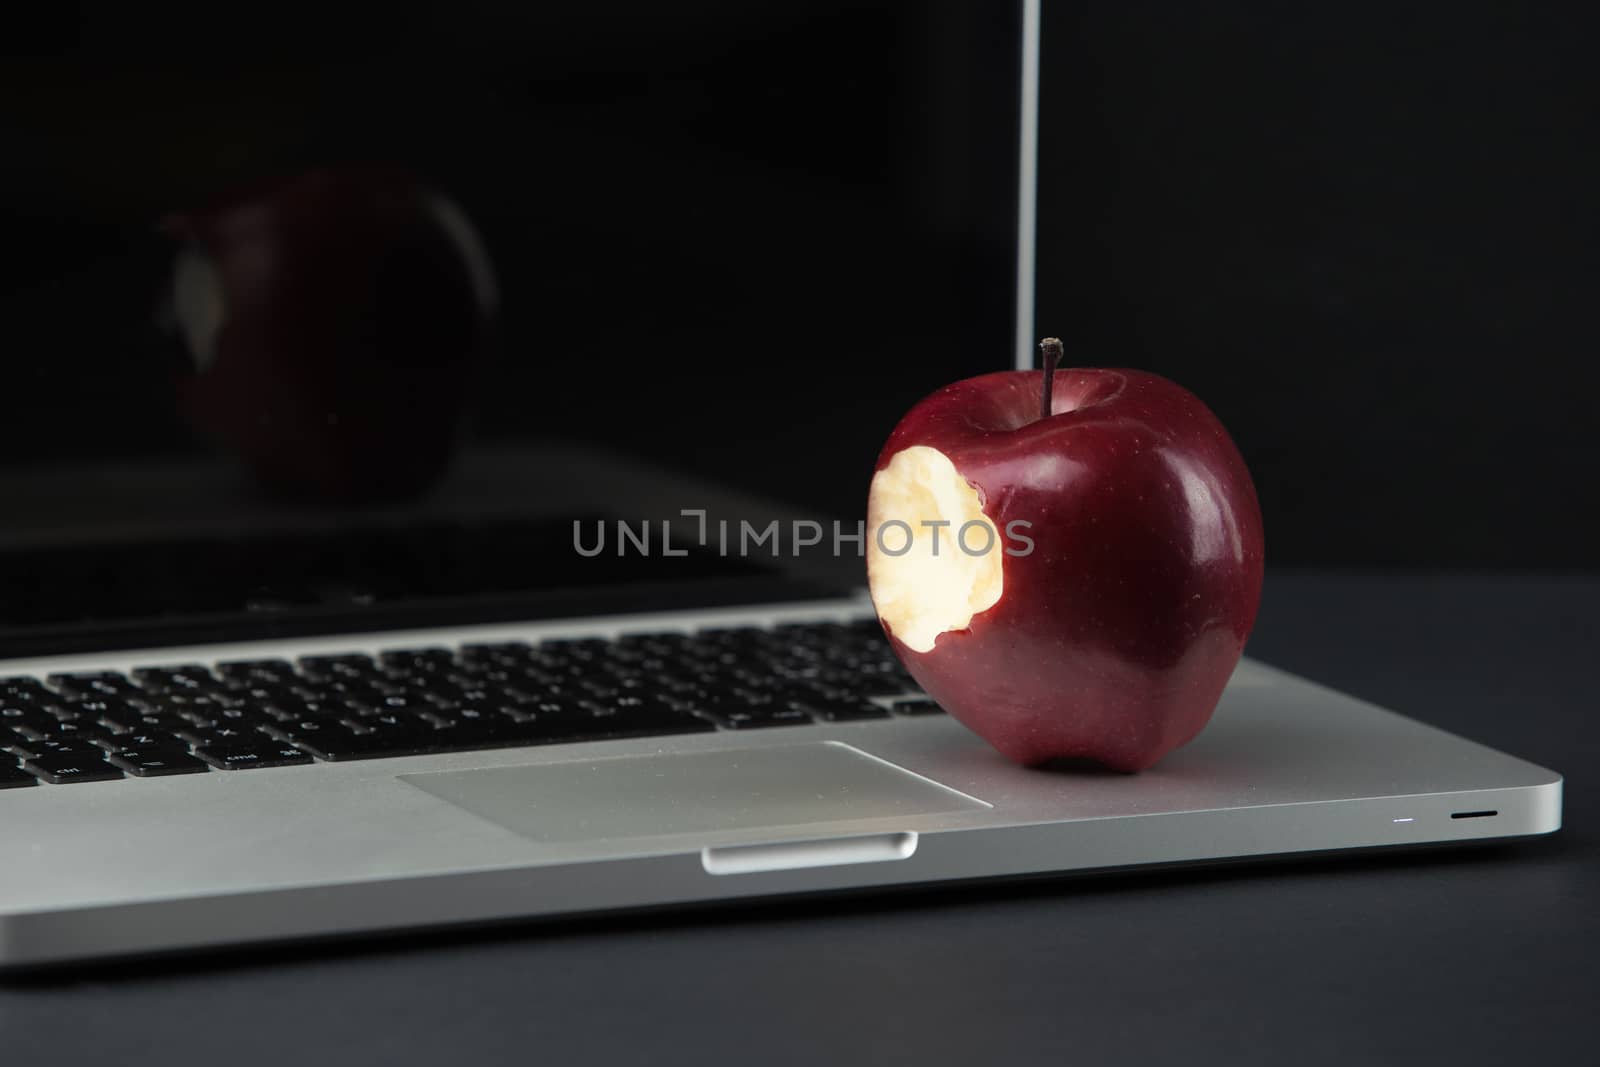 Shiny red apple resting on an open aluminum laptop in selective focus on a black background by robbyfontanesi